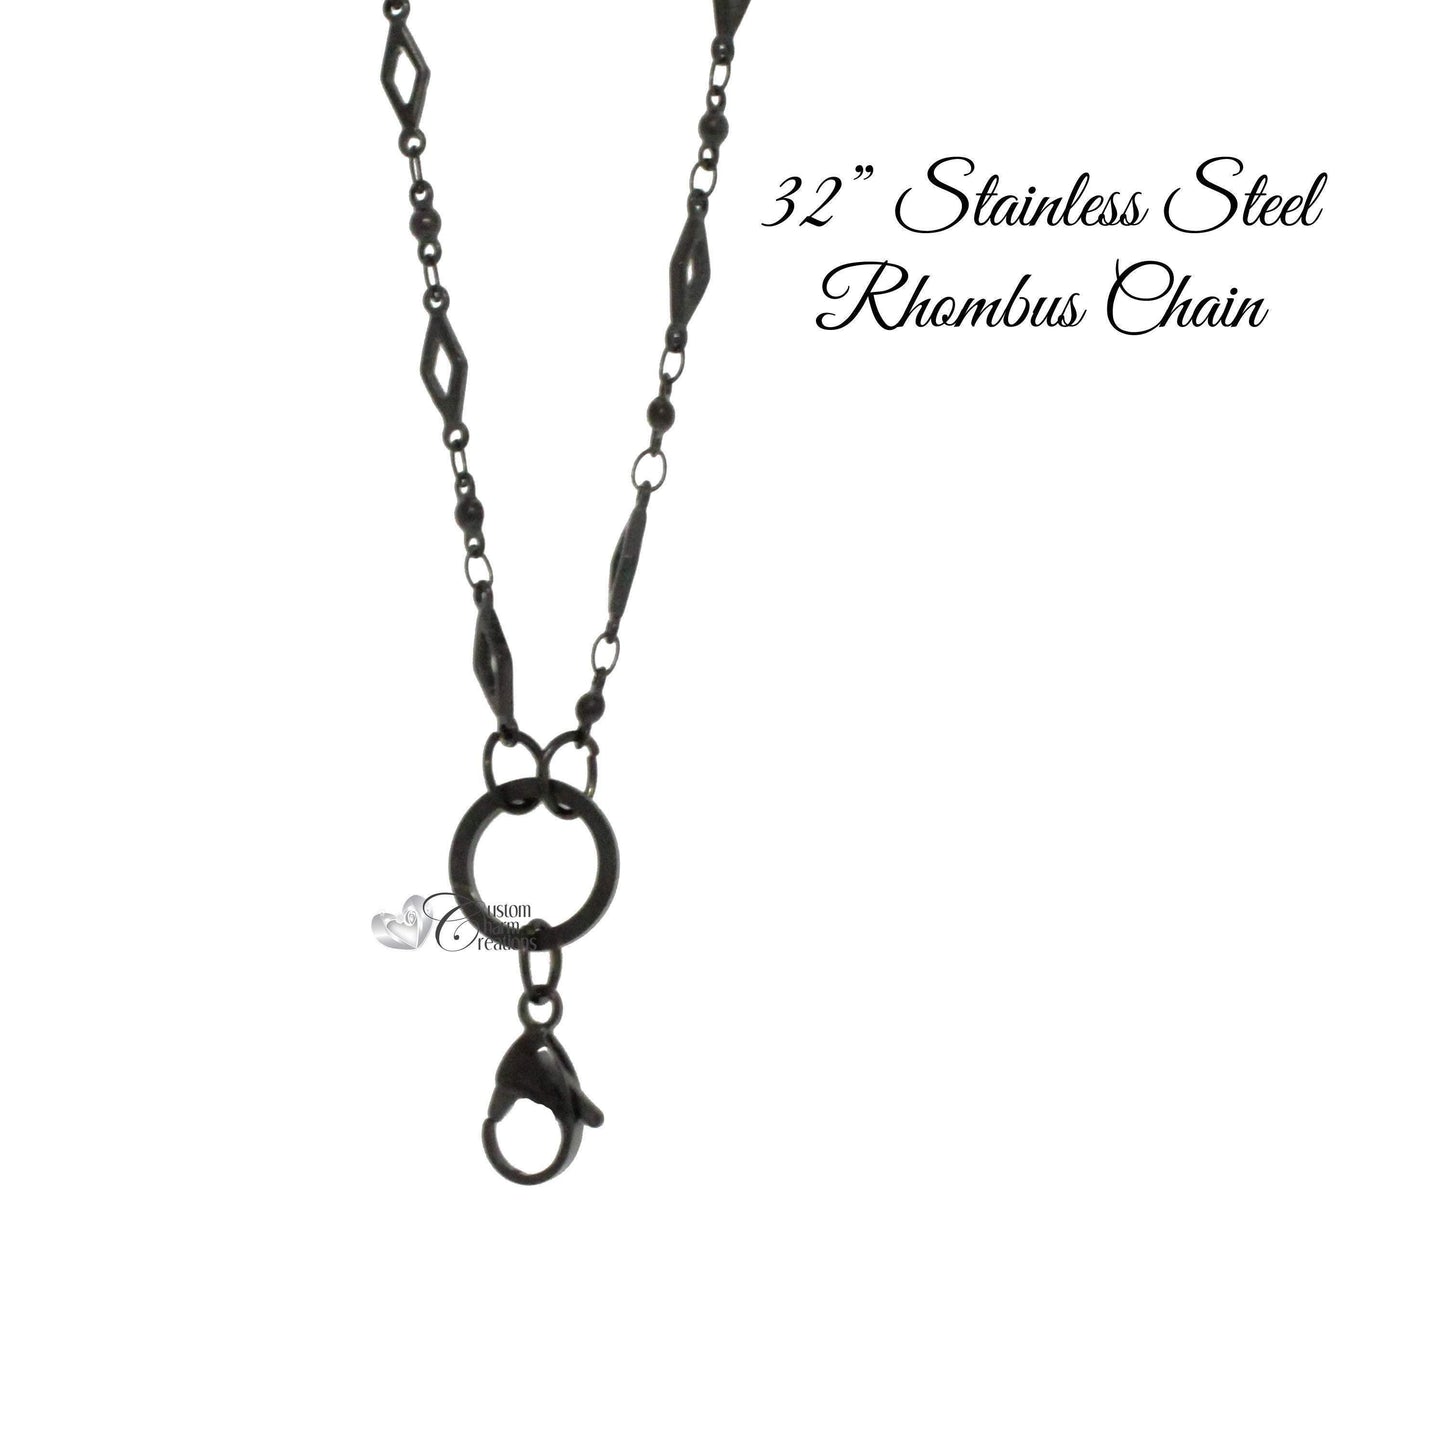 Black Floating Locket Chain • Rhombus Design • Stainless Steel Necklace •  32&quot; Long  - C93